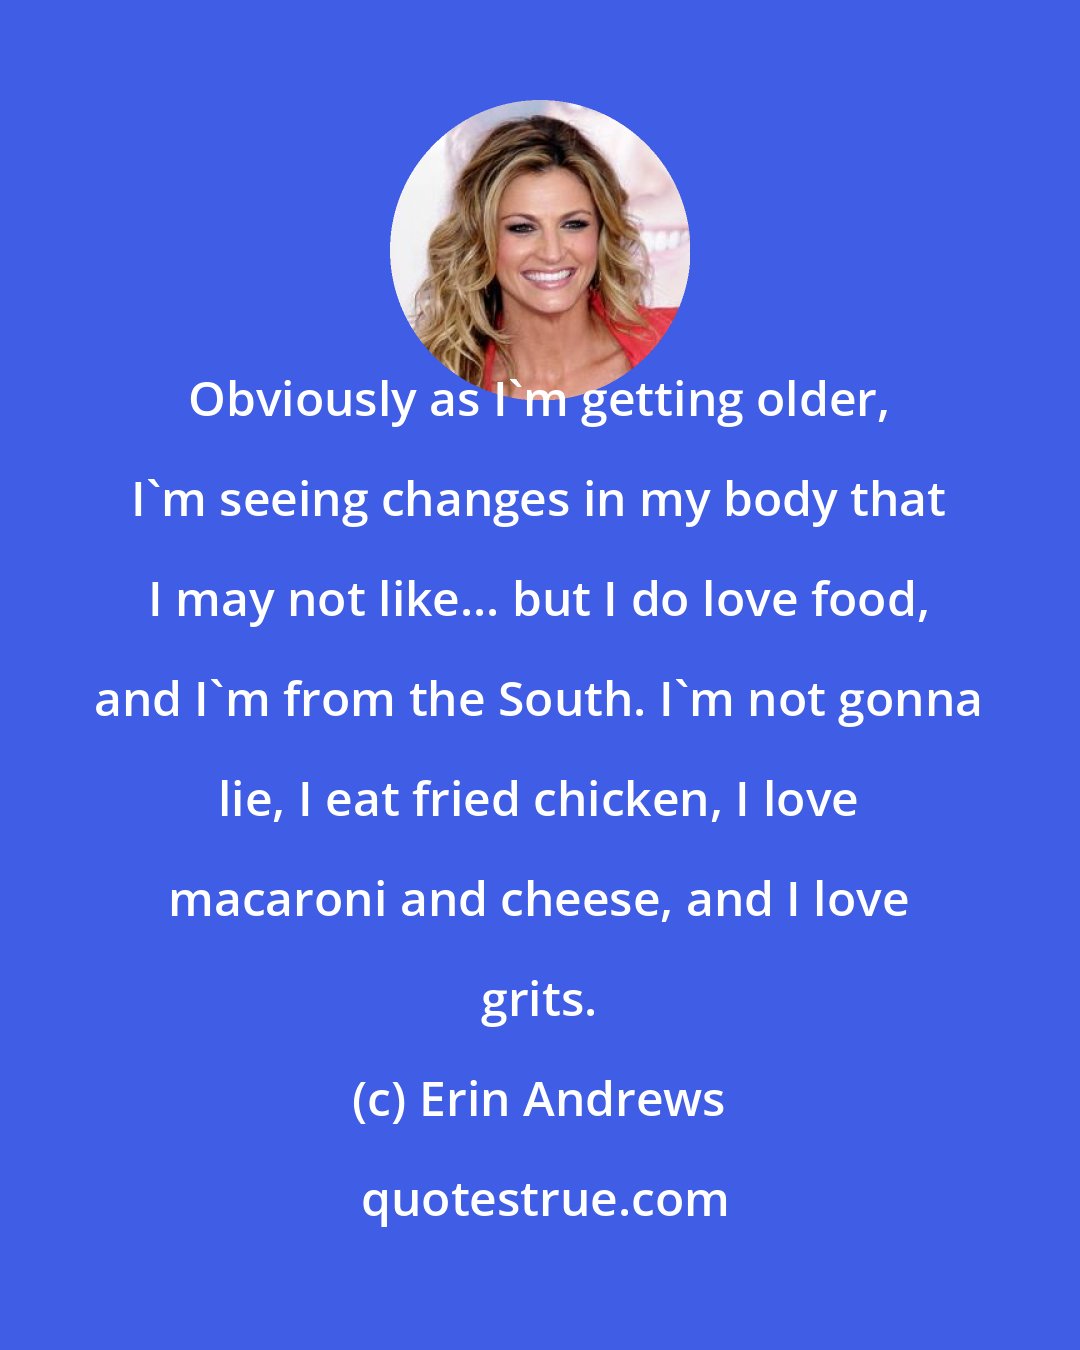 Erin Andrews: Obviously as I'm getting older, I'm seeing changes in my body that I may not like... but I do love food, and I'm from the South. I'm not gonna lie, I eat fried chicken, I love macaroni and cheese, and I love grits.